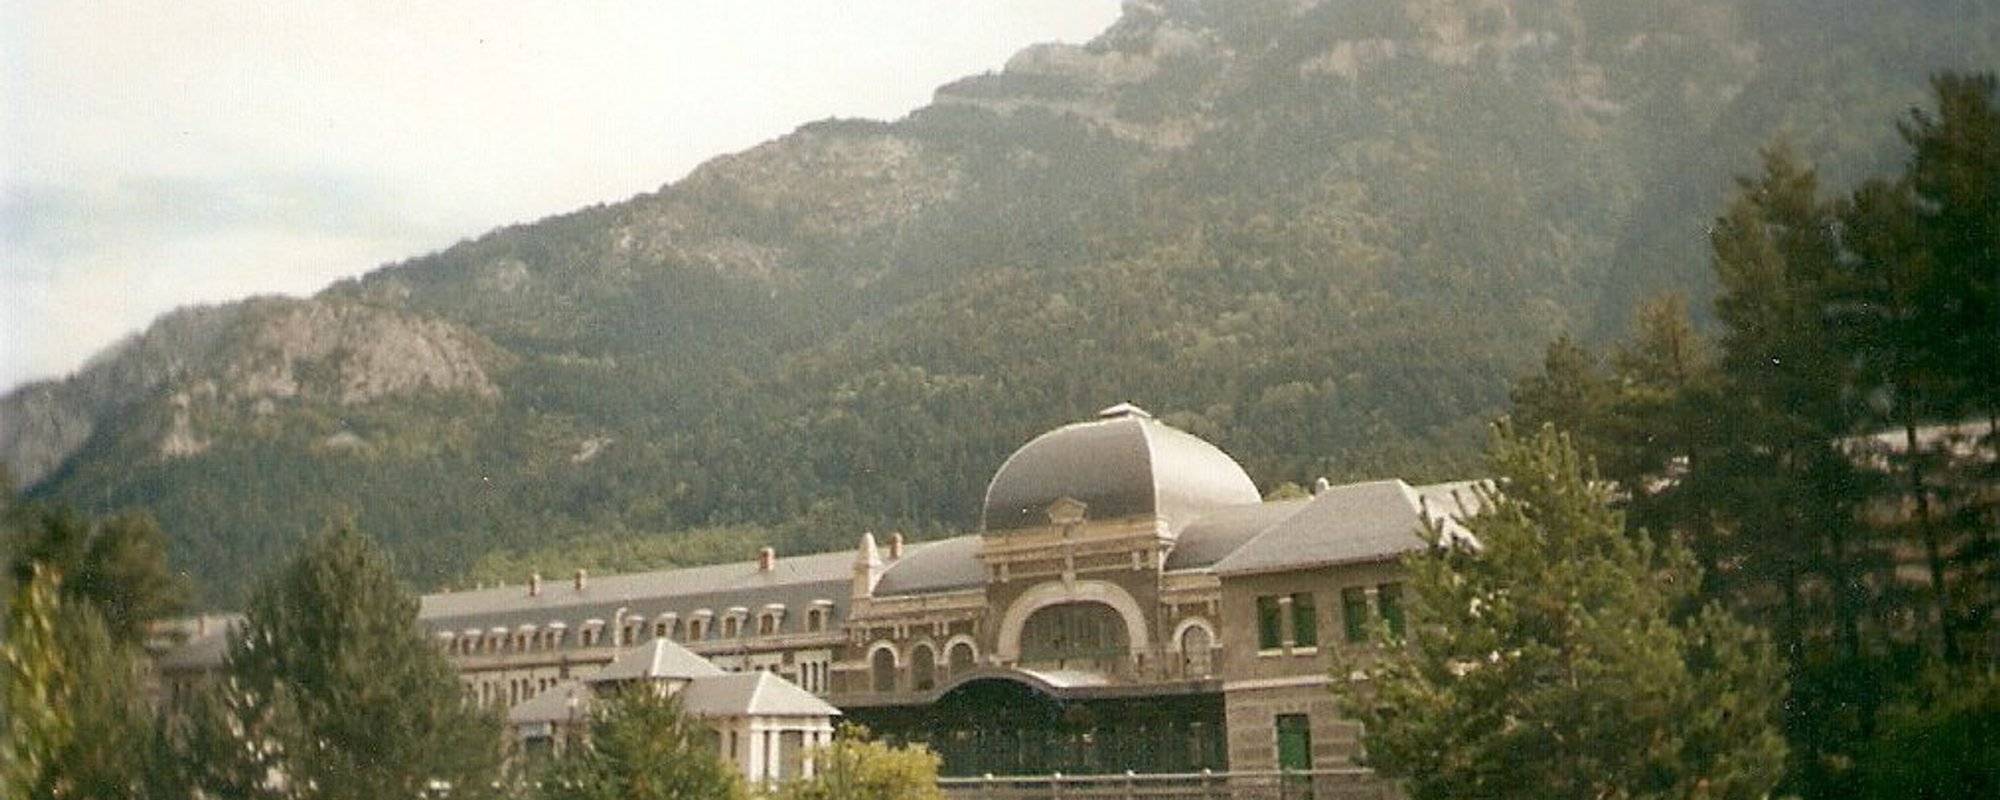 Memory of a Trip - Canfranc Station 2002